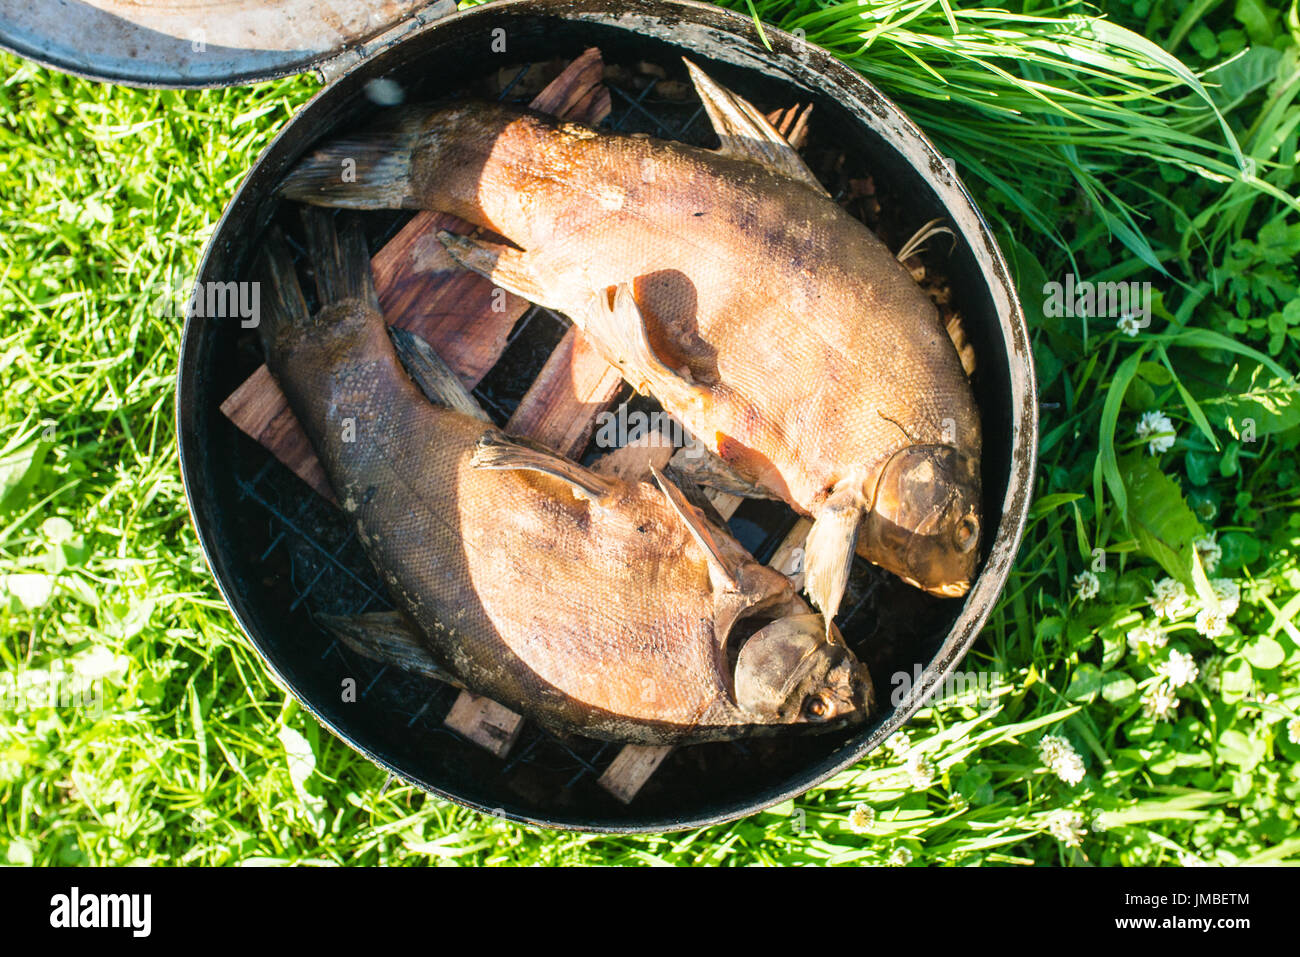 Fish Smoking Process For Home Use. Smoked fish. Close Up Smoking Process Fish In Smoking Shed For Home Use. Smoke from the open fire Stock Photo